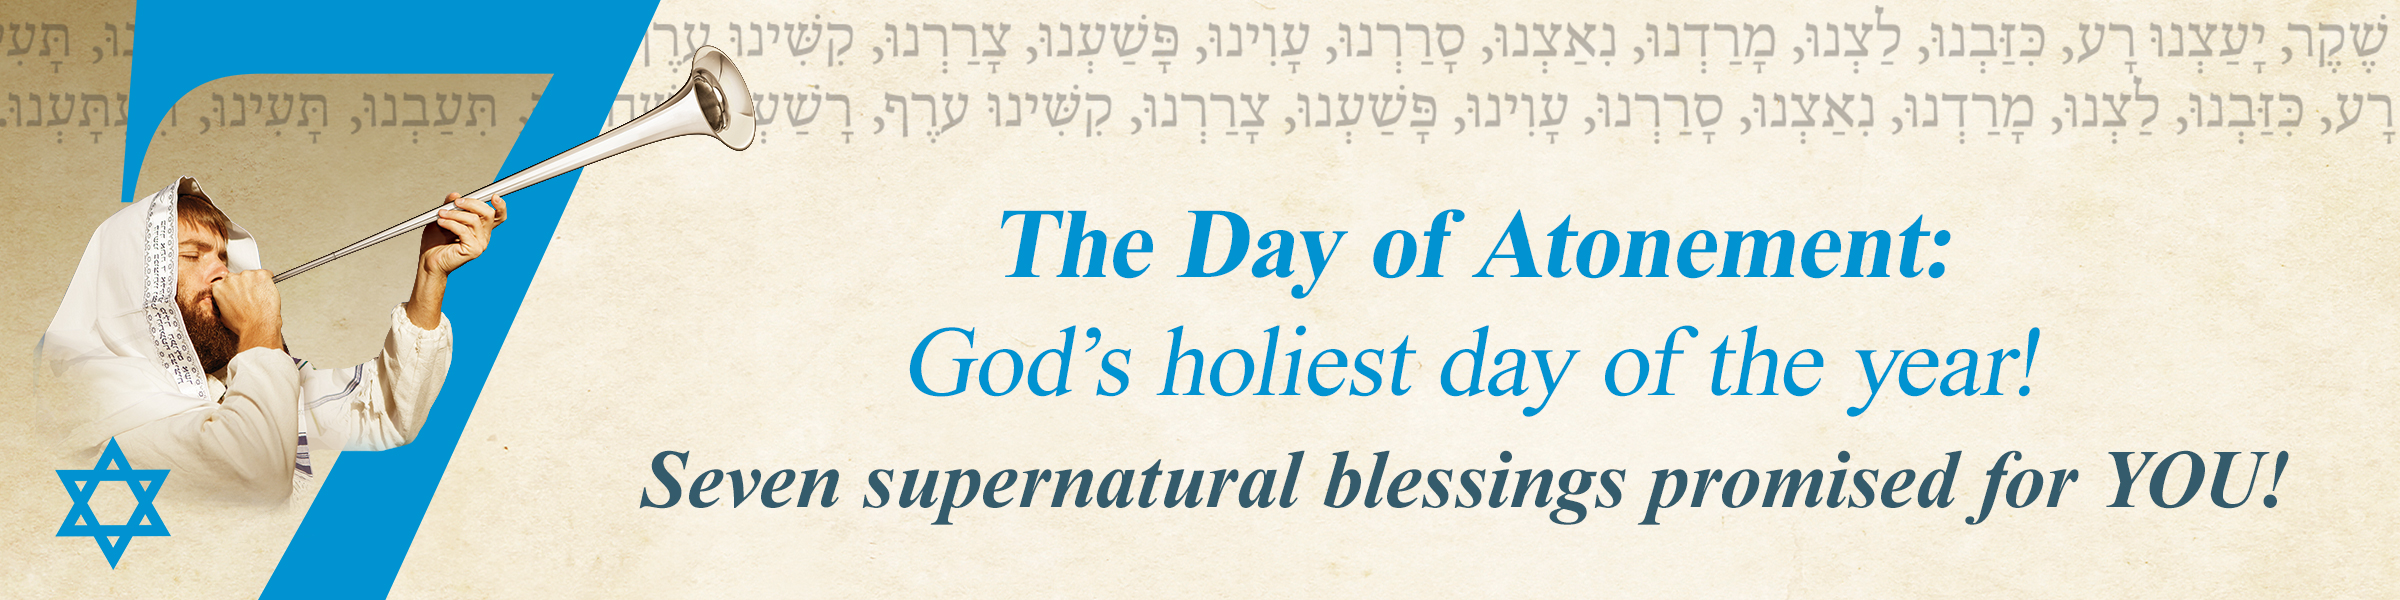 The Day of Atonement: God's Holiest Day of the Year! Seven supernatural blessings promised for YOU!